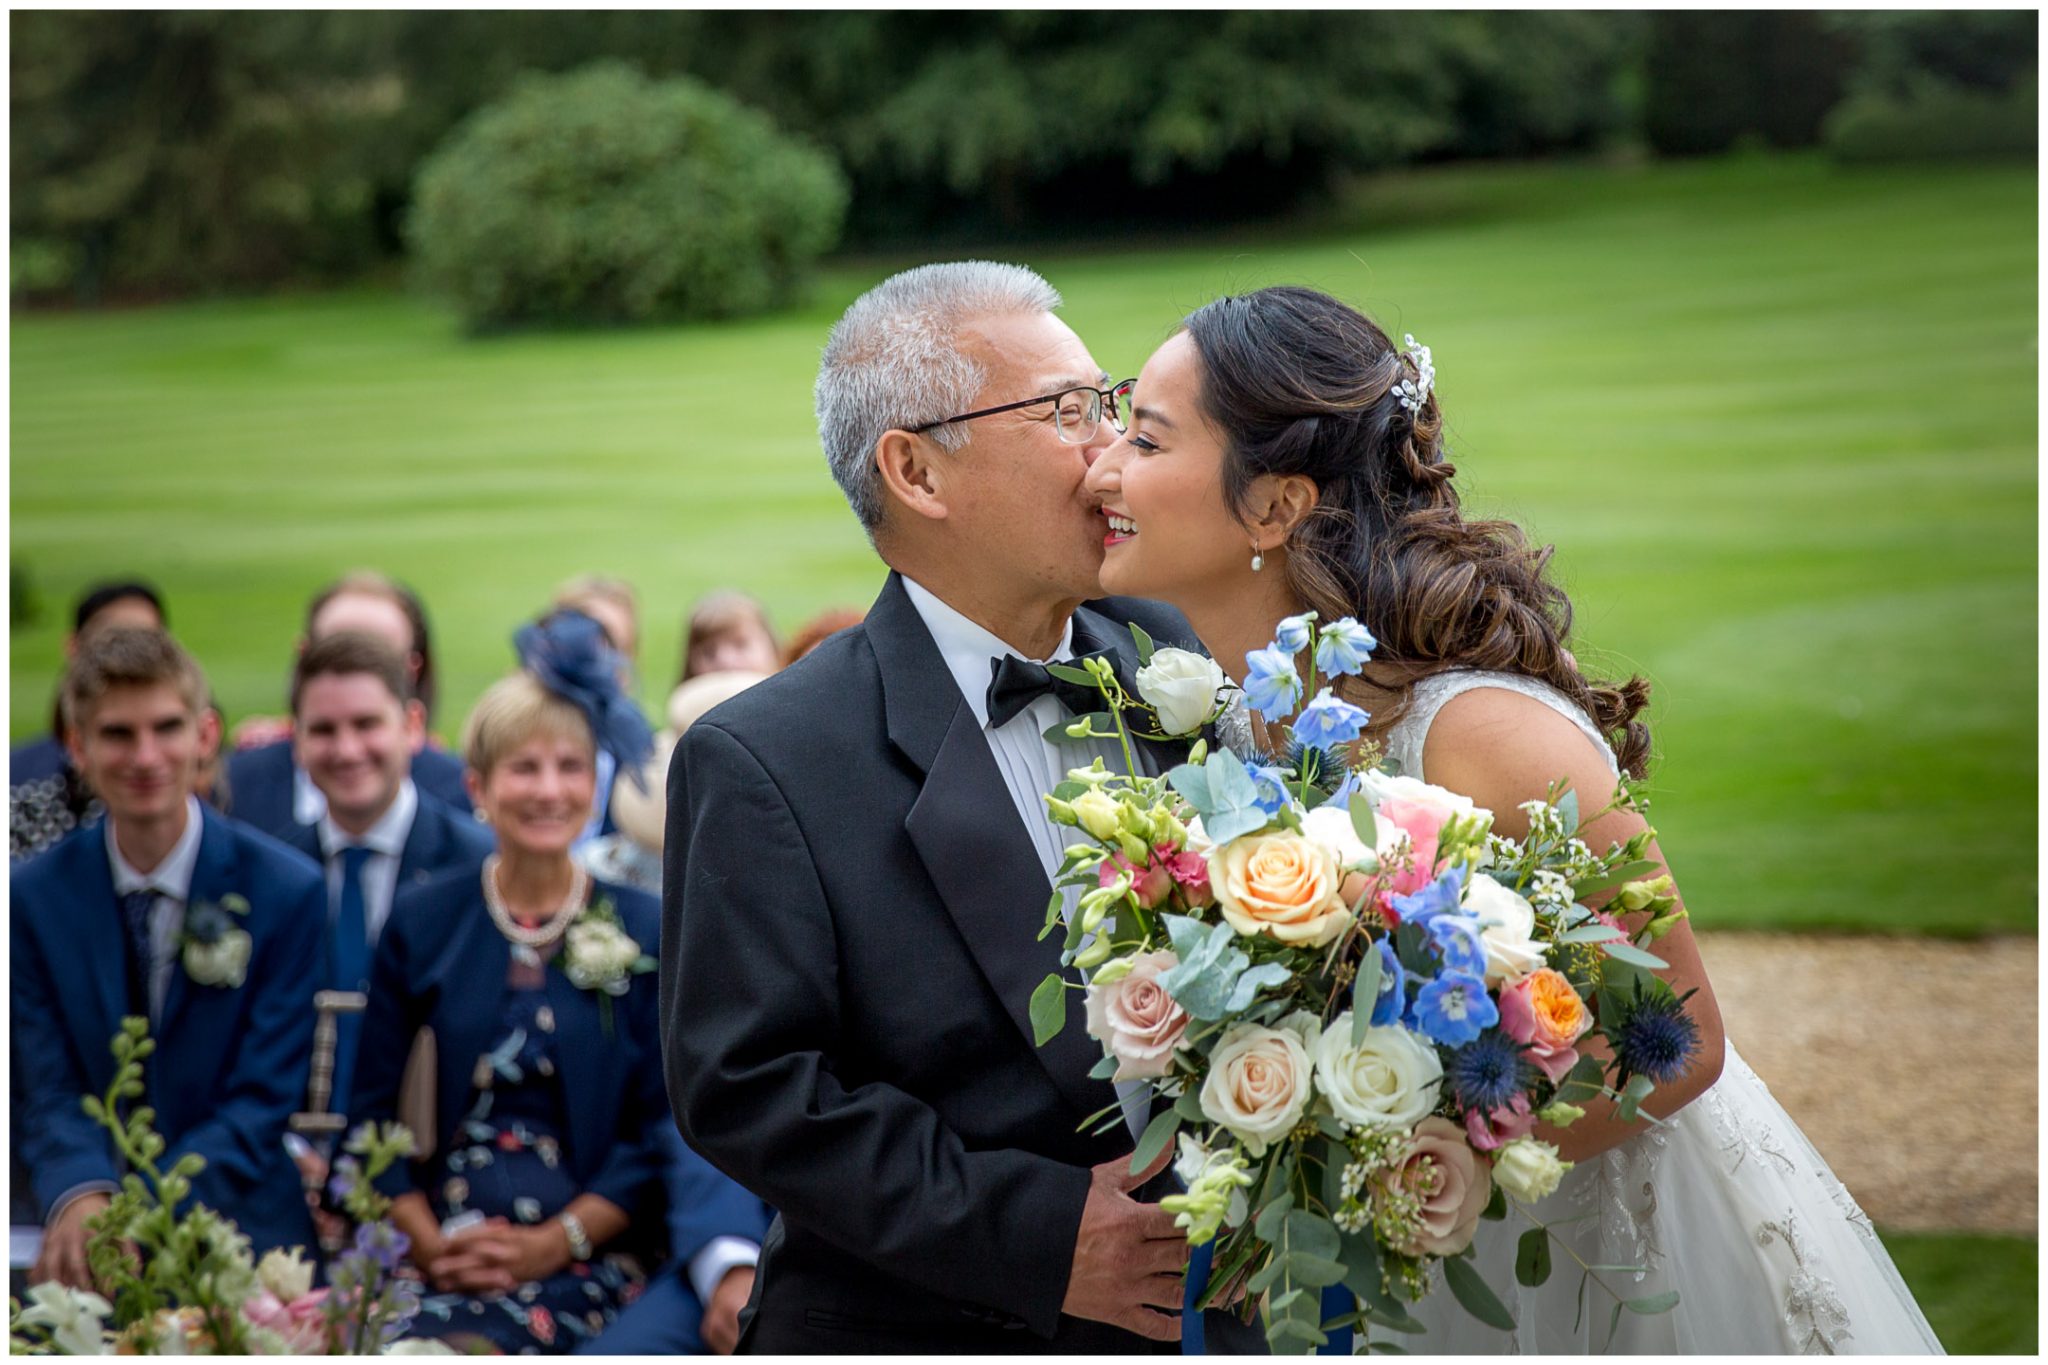 Father of the bride gives his daughter a kiss as they arrive at the front of the aisle